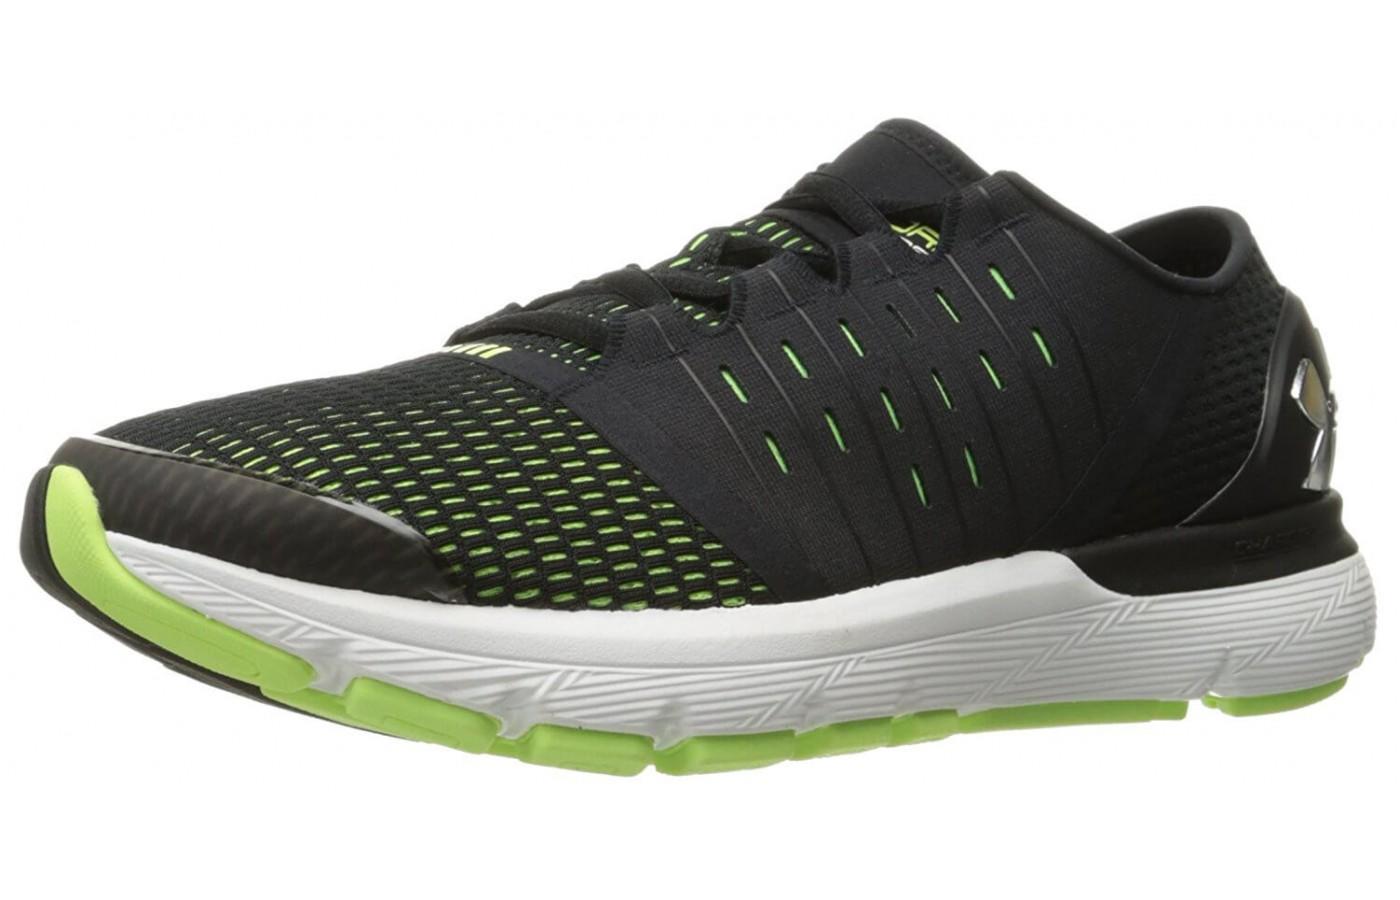 The Under Armour Speedform Europa has a highly cushioned midsole.